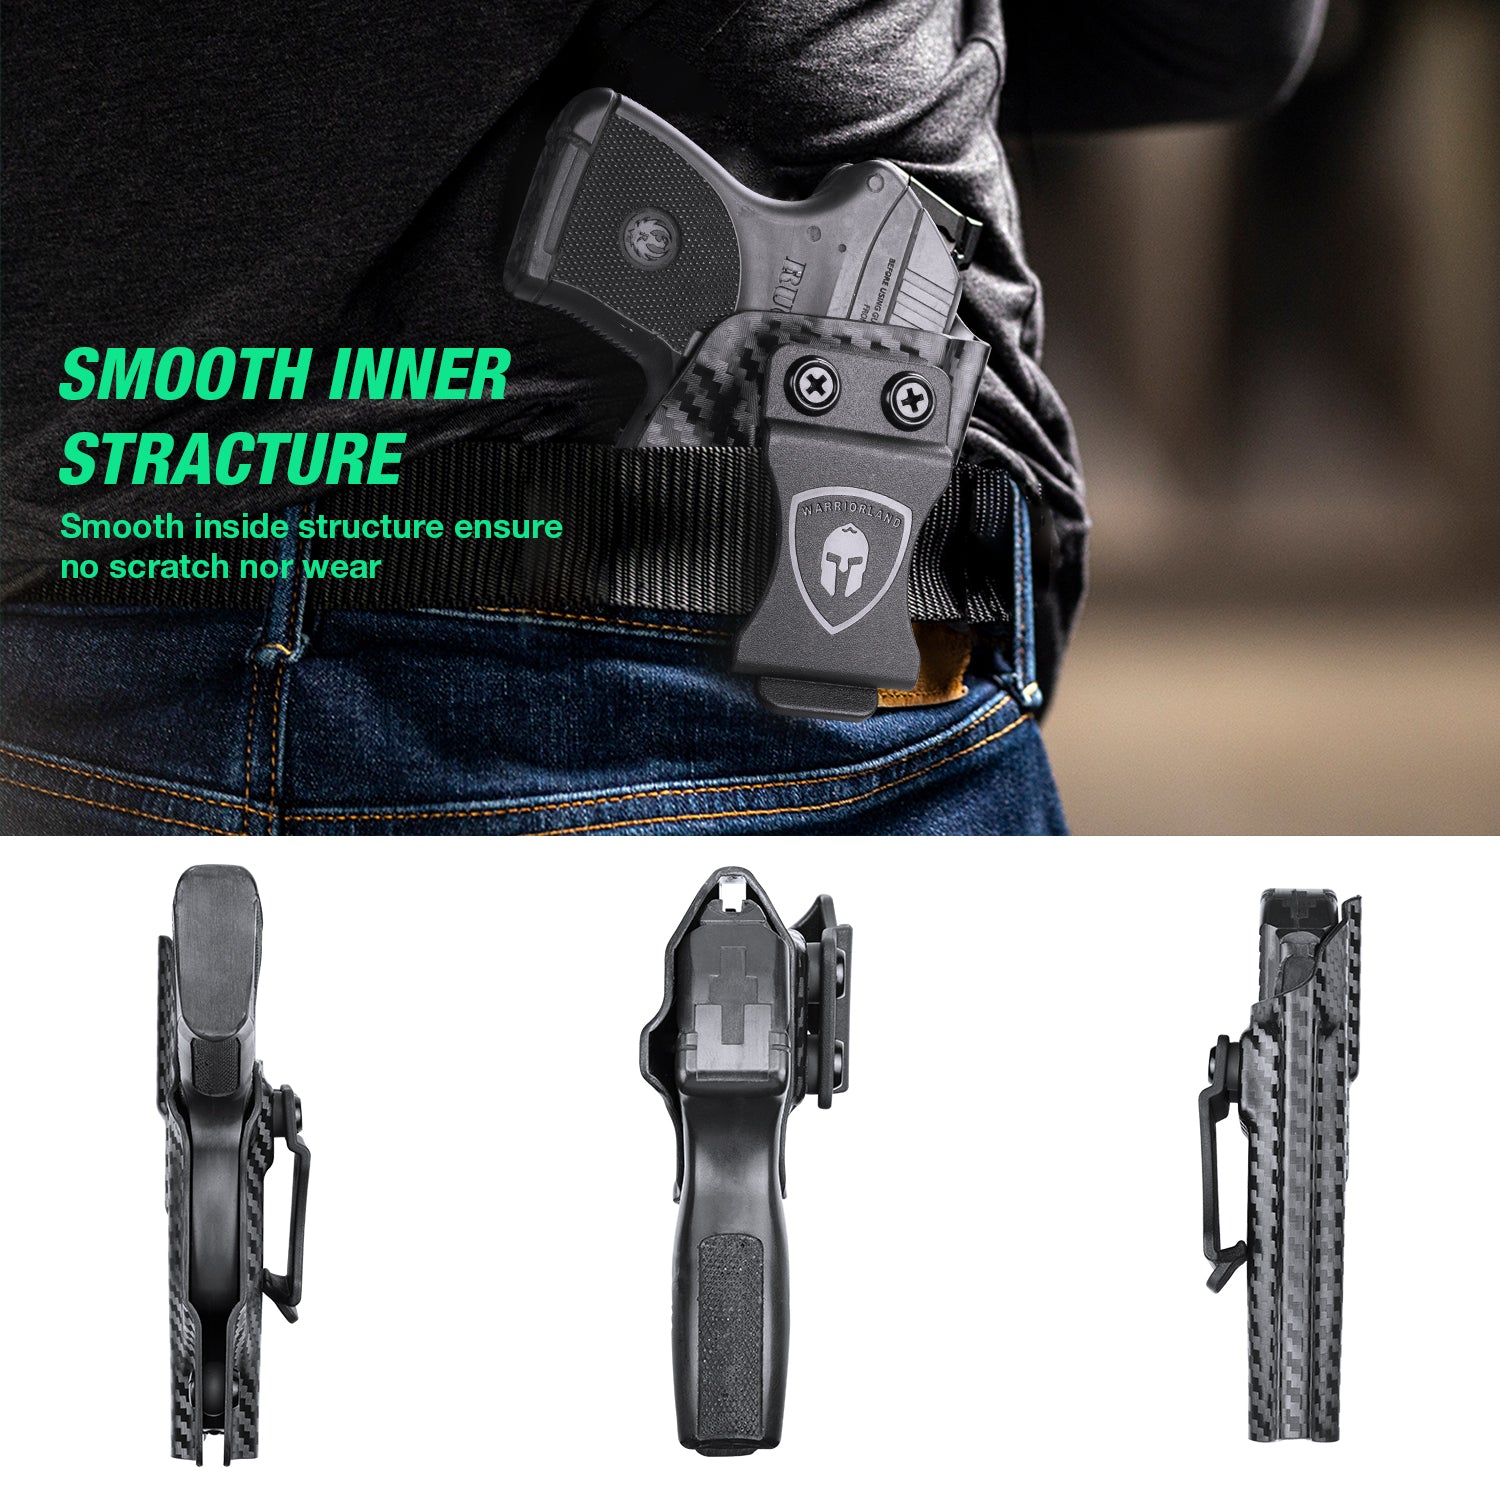 Carbon Fiber Kydex Smith & Wesson SD9 SD40 VE IWB Concealed Carry Holster | WARRIORLAND